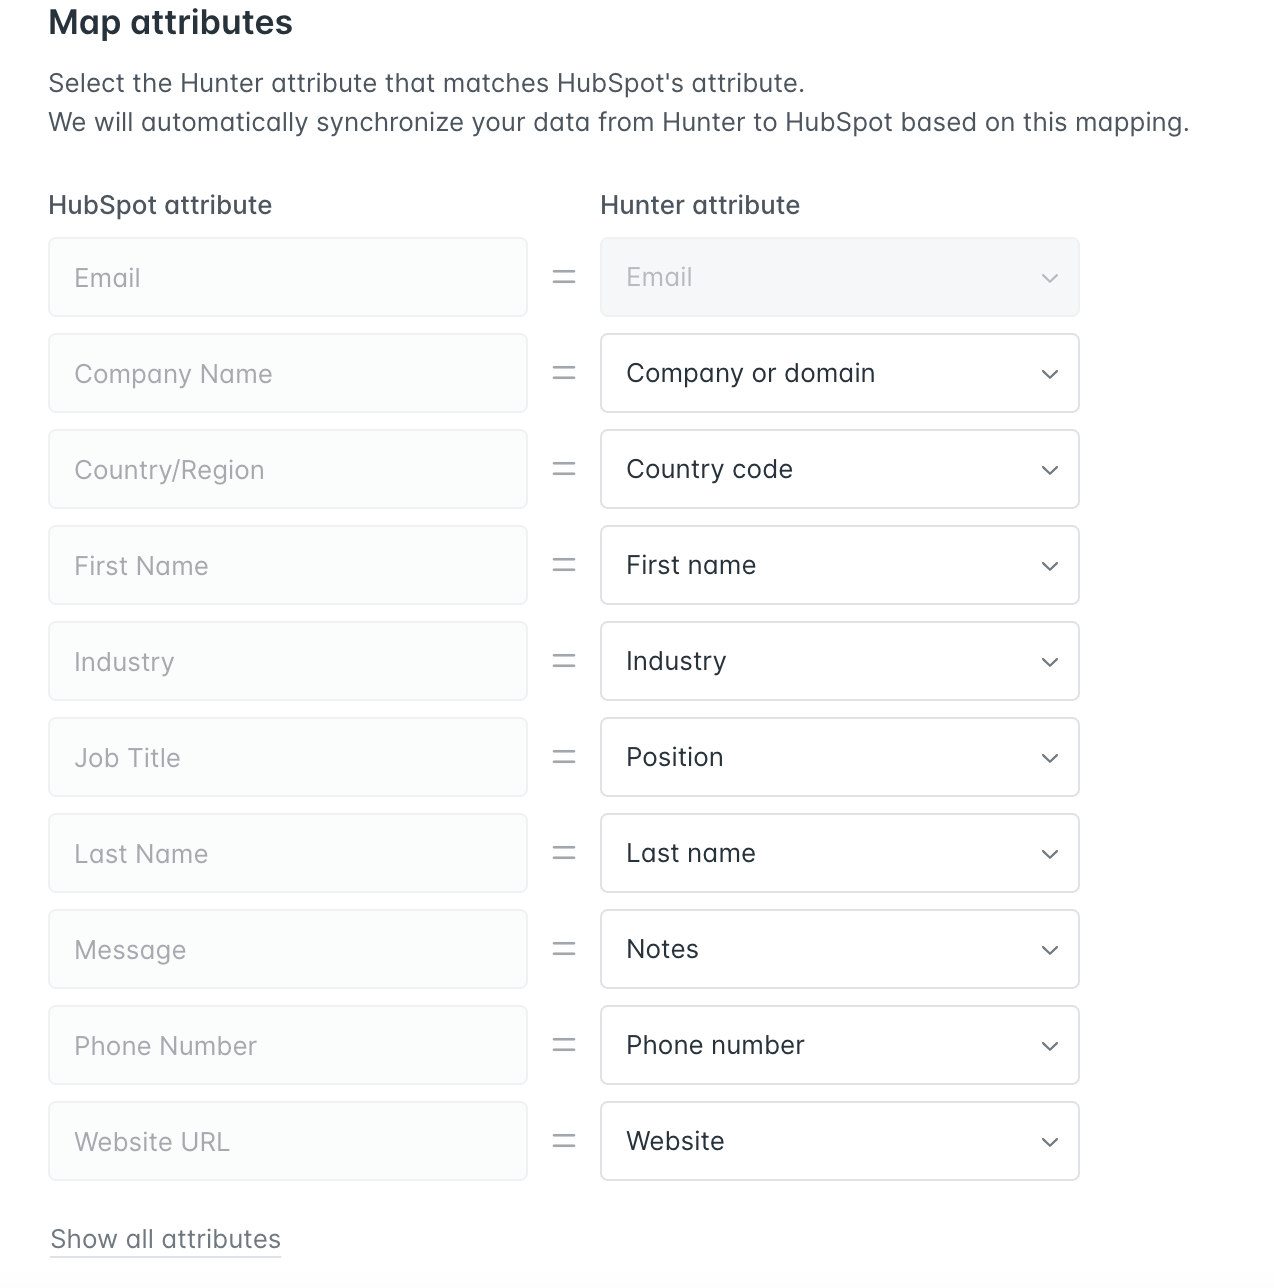 Mapping Hunter attributes to HubSpot attributes